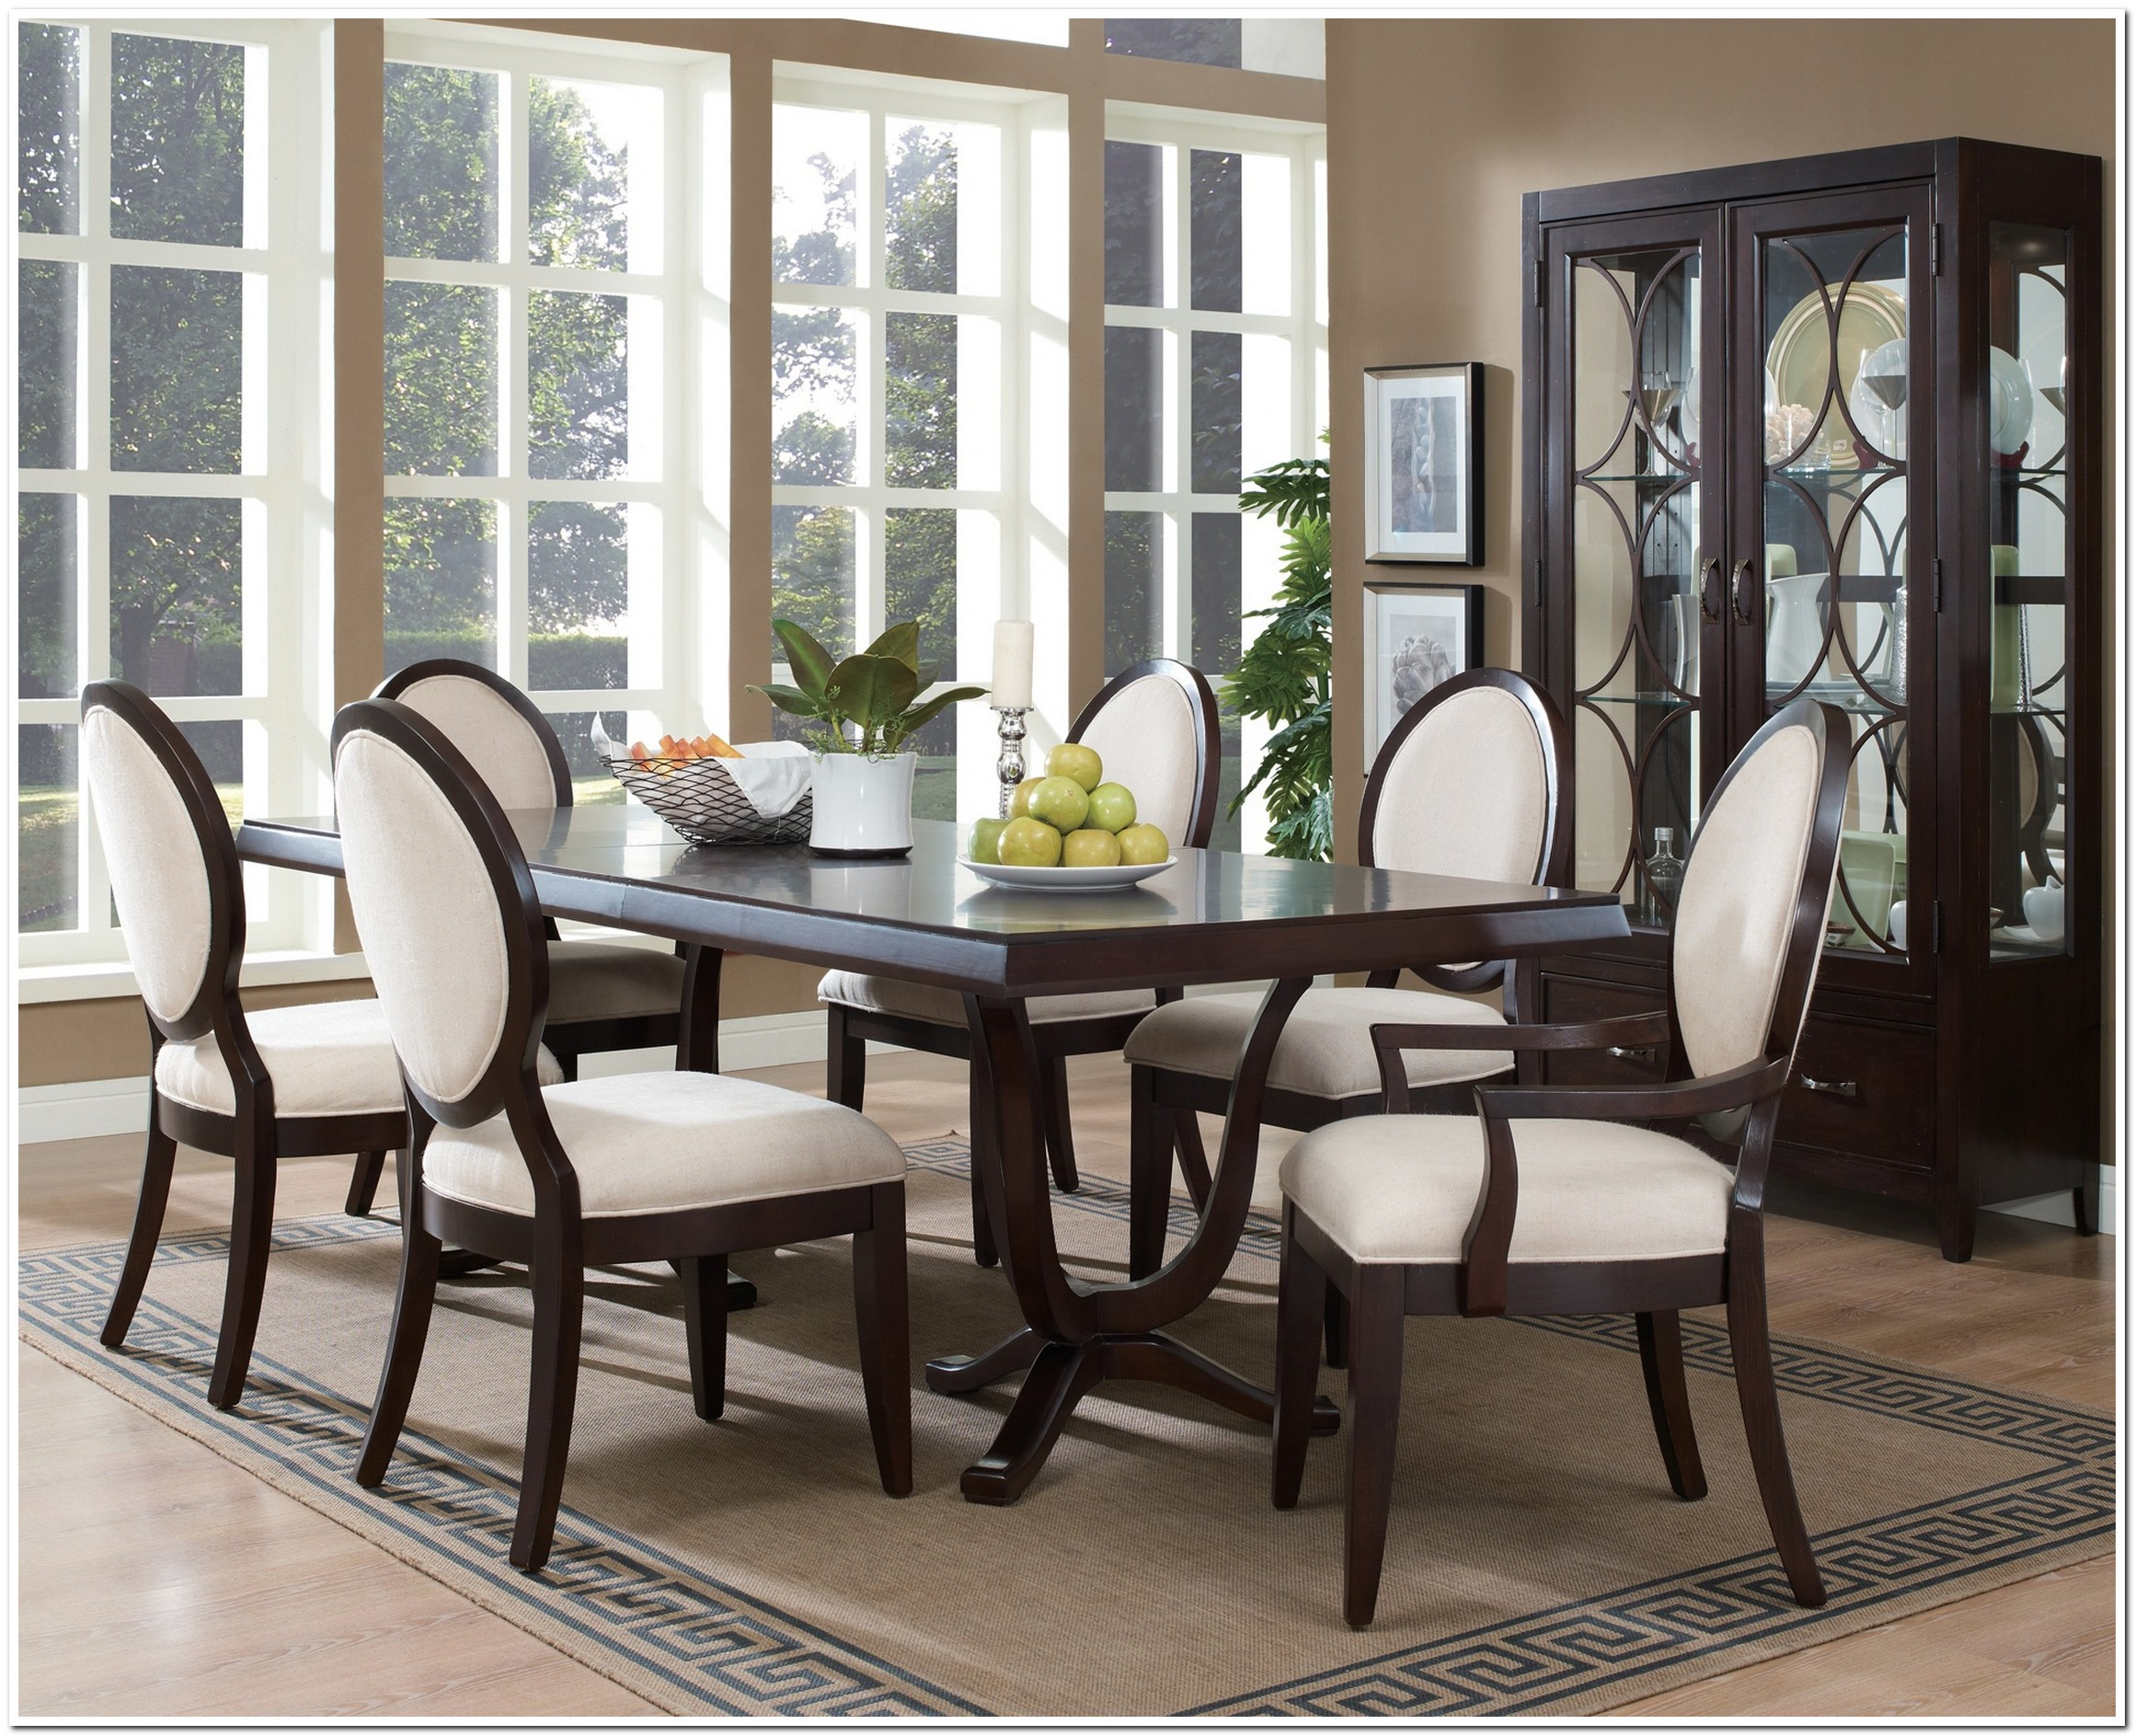 Dining Room Sets For Small Spaces 7way Set With Bench Big Inside Proportions 2321 X 1887 